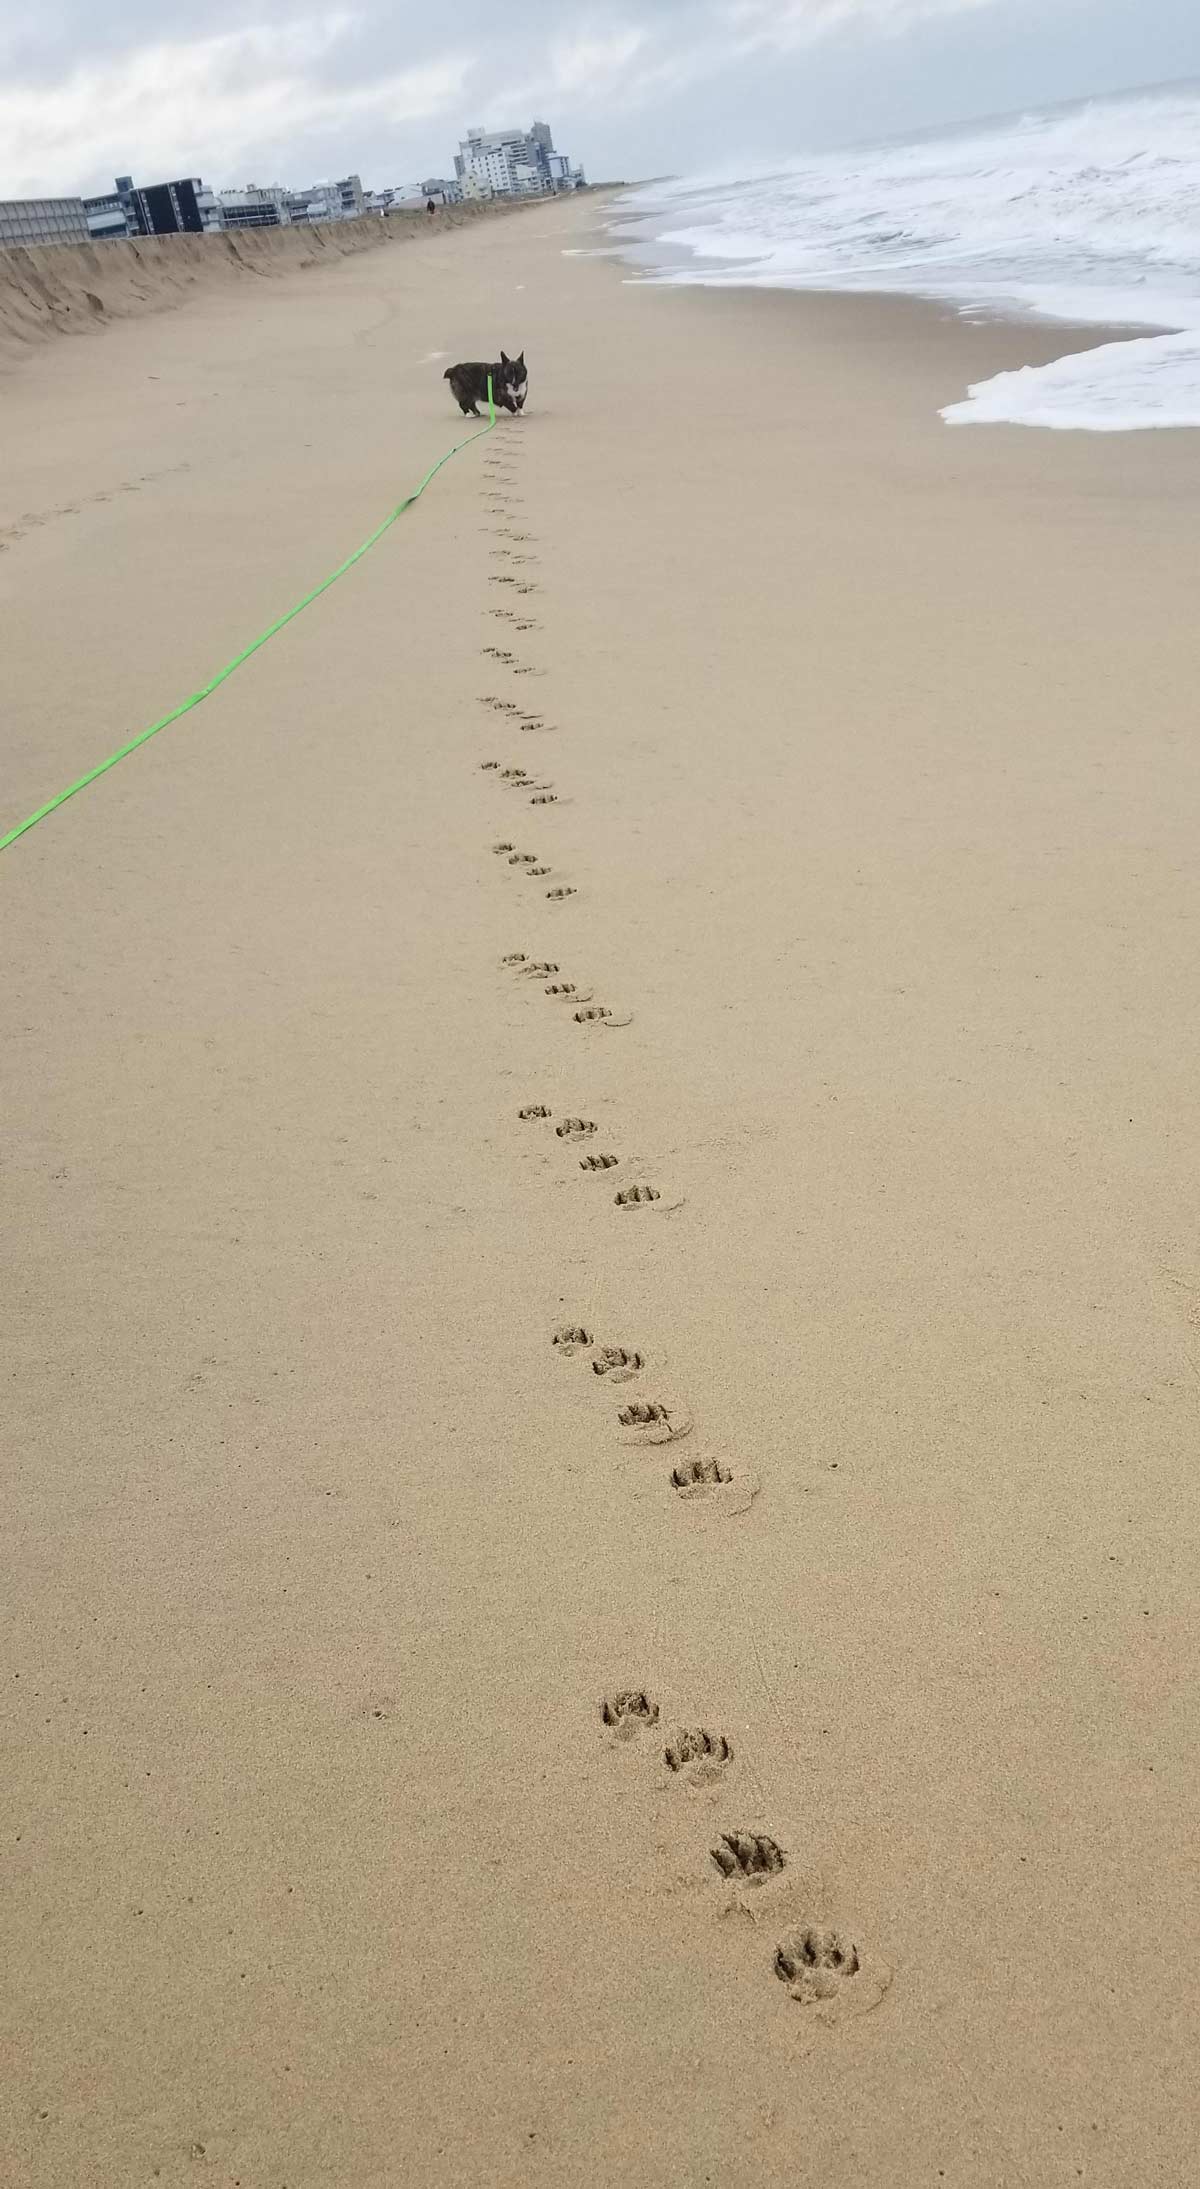 My dog's footprints leave perfect stripes when he runs on the beach